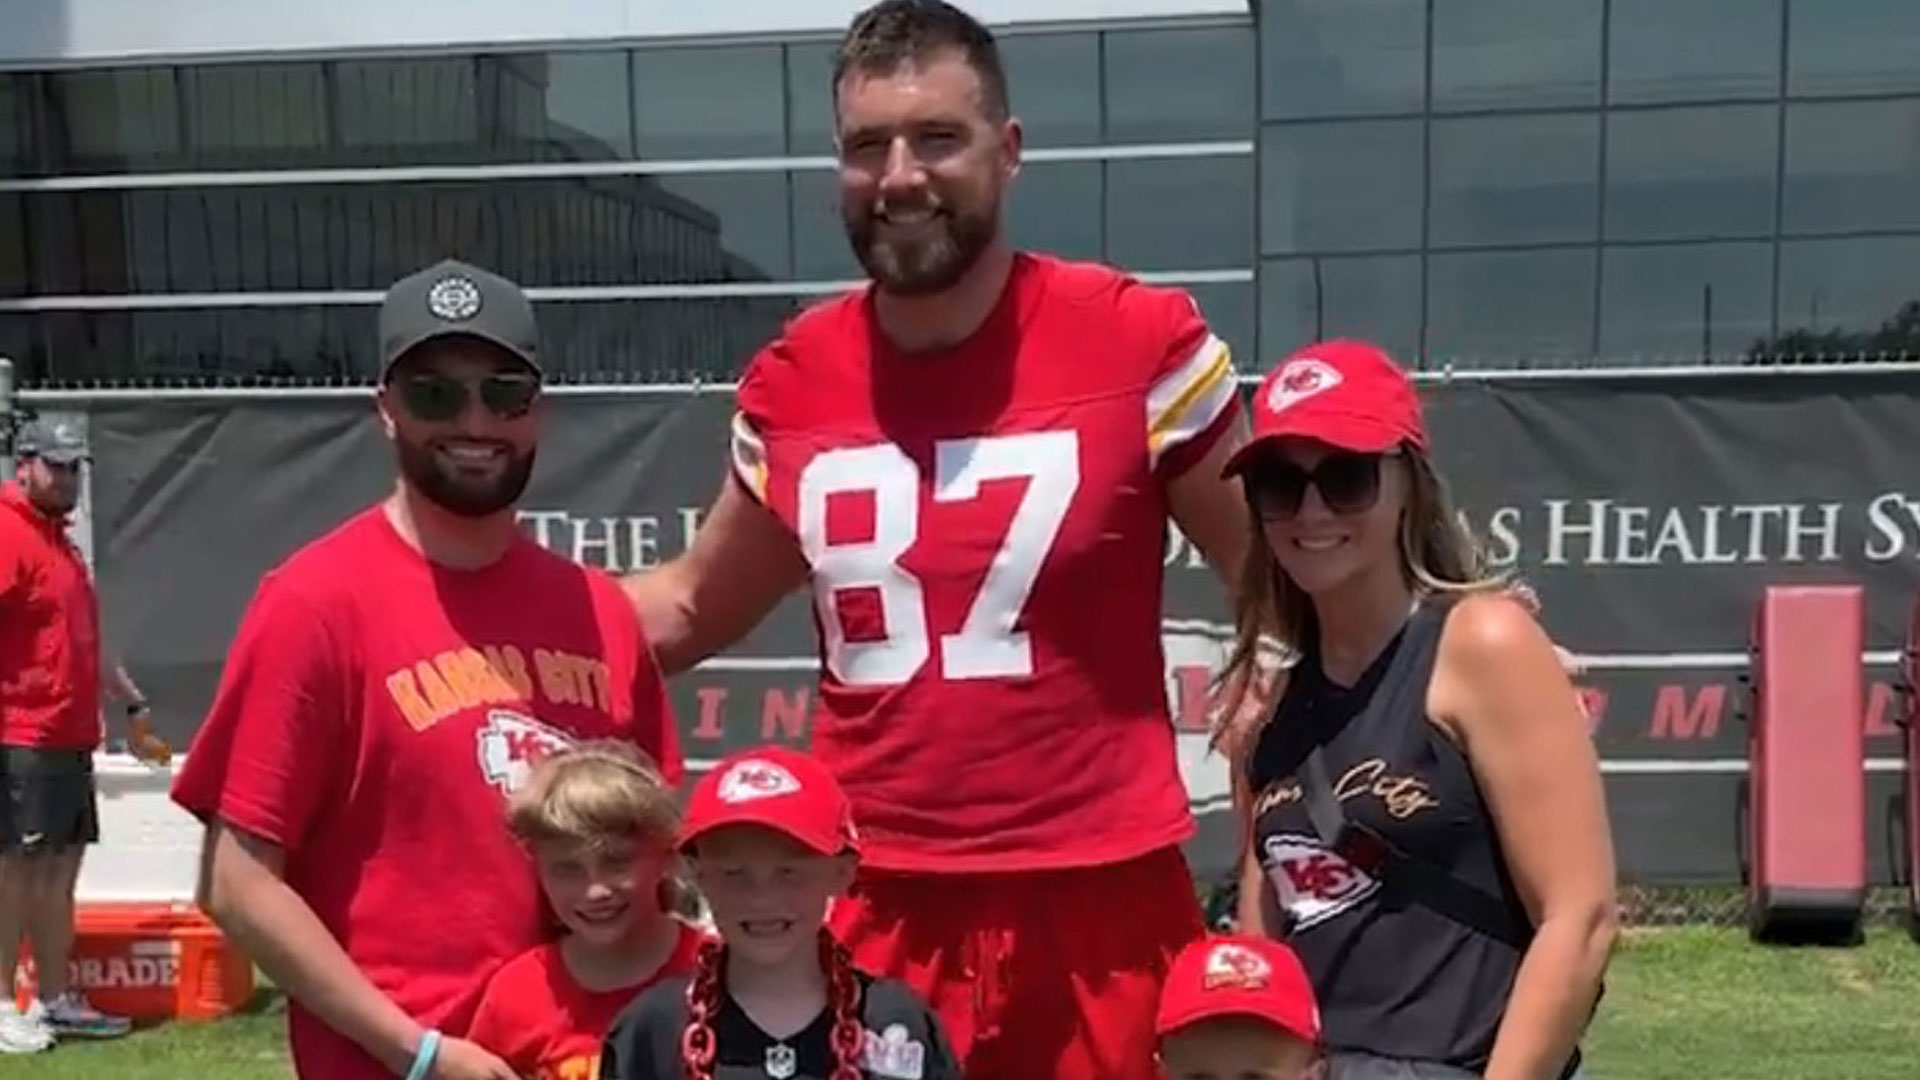 Travis Kelce and Patrick Mahomes show caring side by meeting young cancer survivor – and fans spot nod to Taylor Swift [Video]